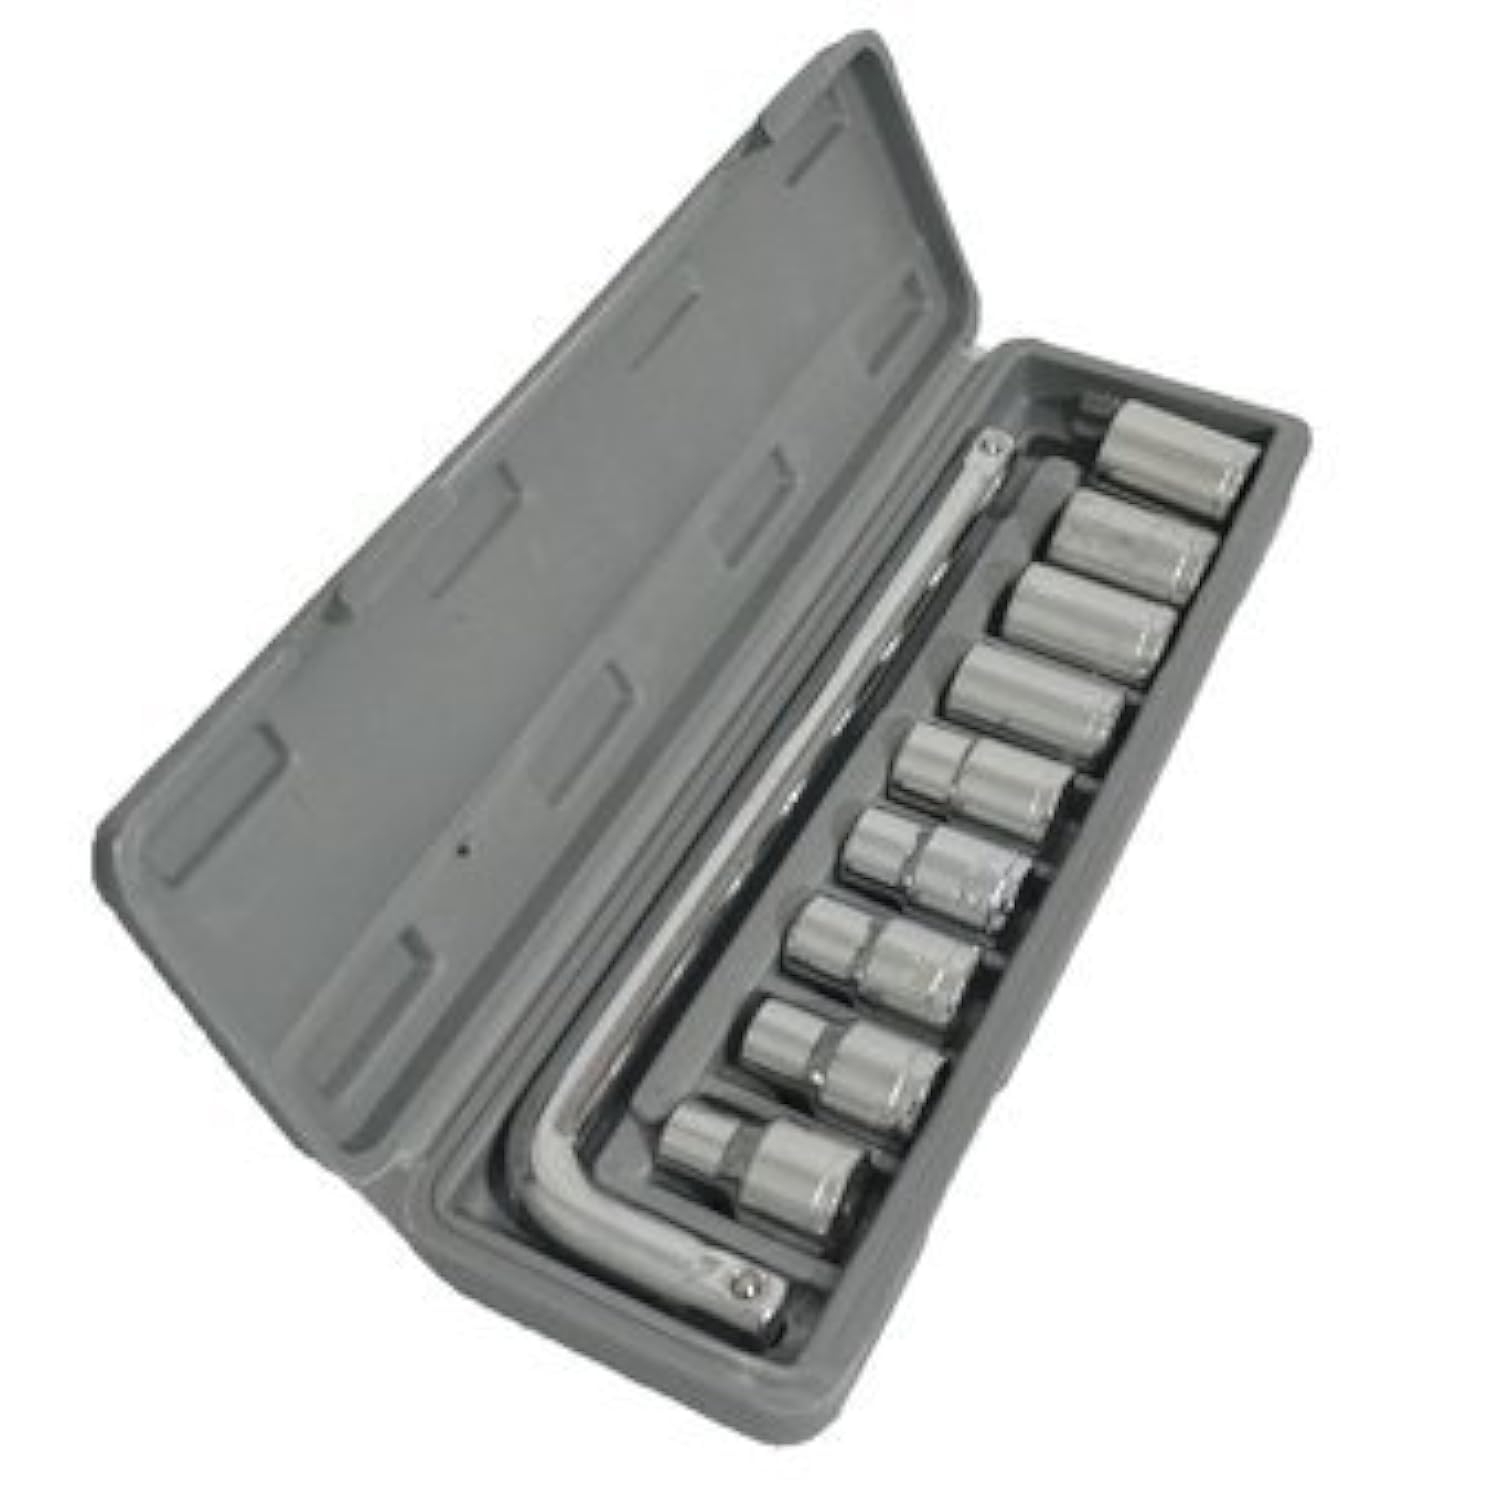 Plastic Socket Wrench Set (Grey, 10-Pieces)